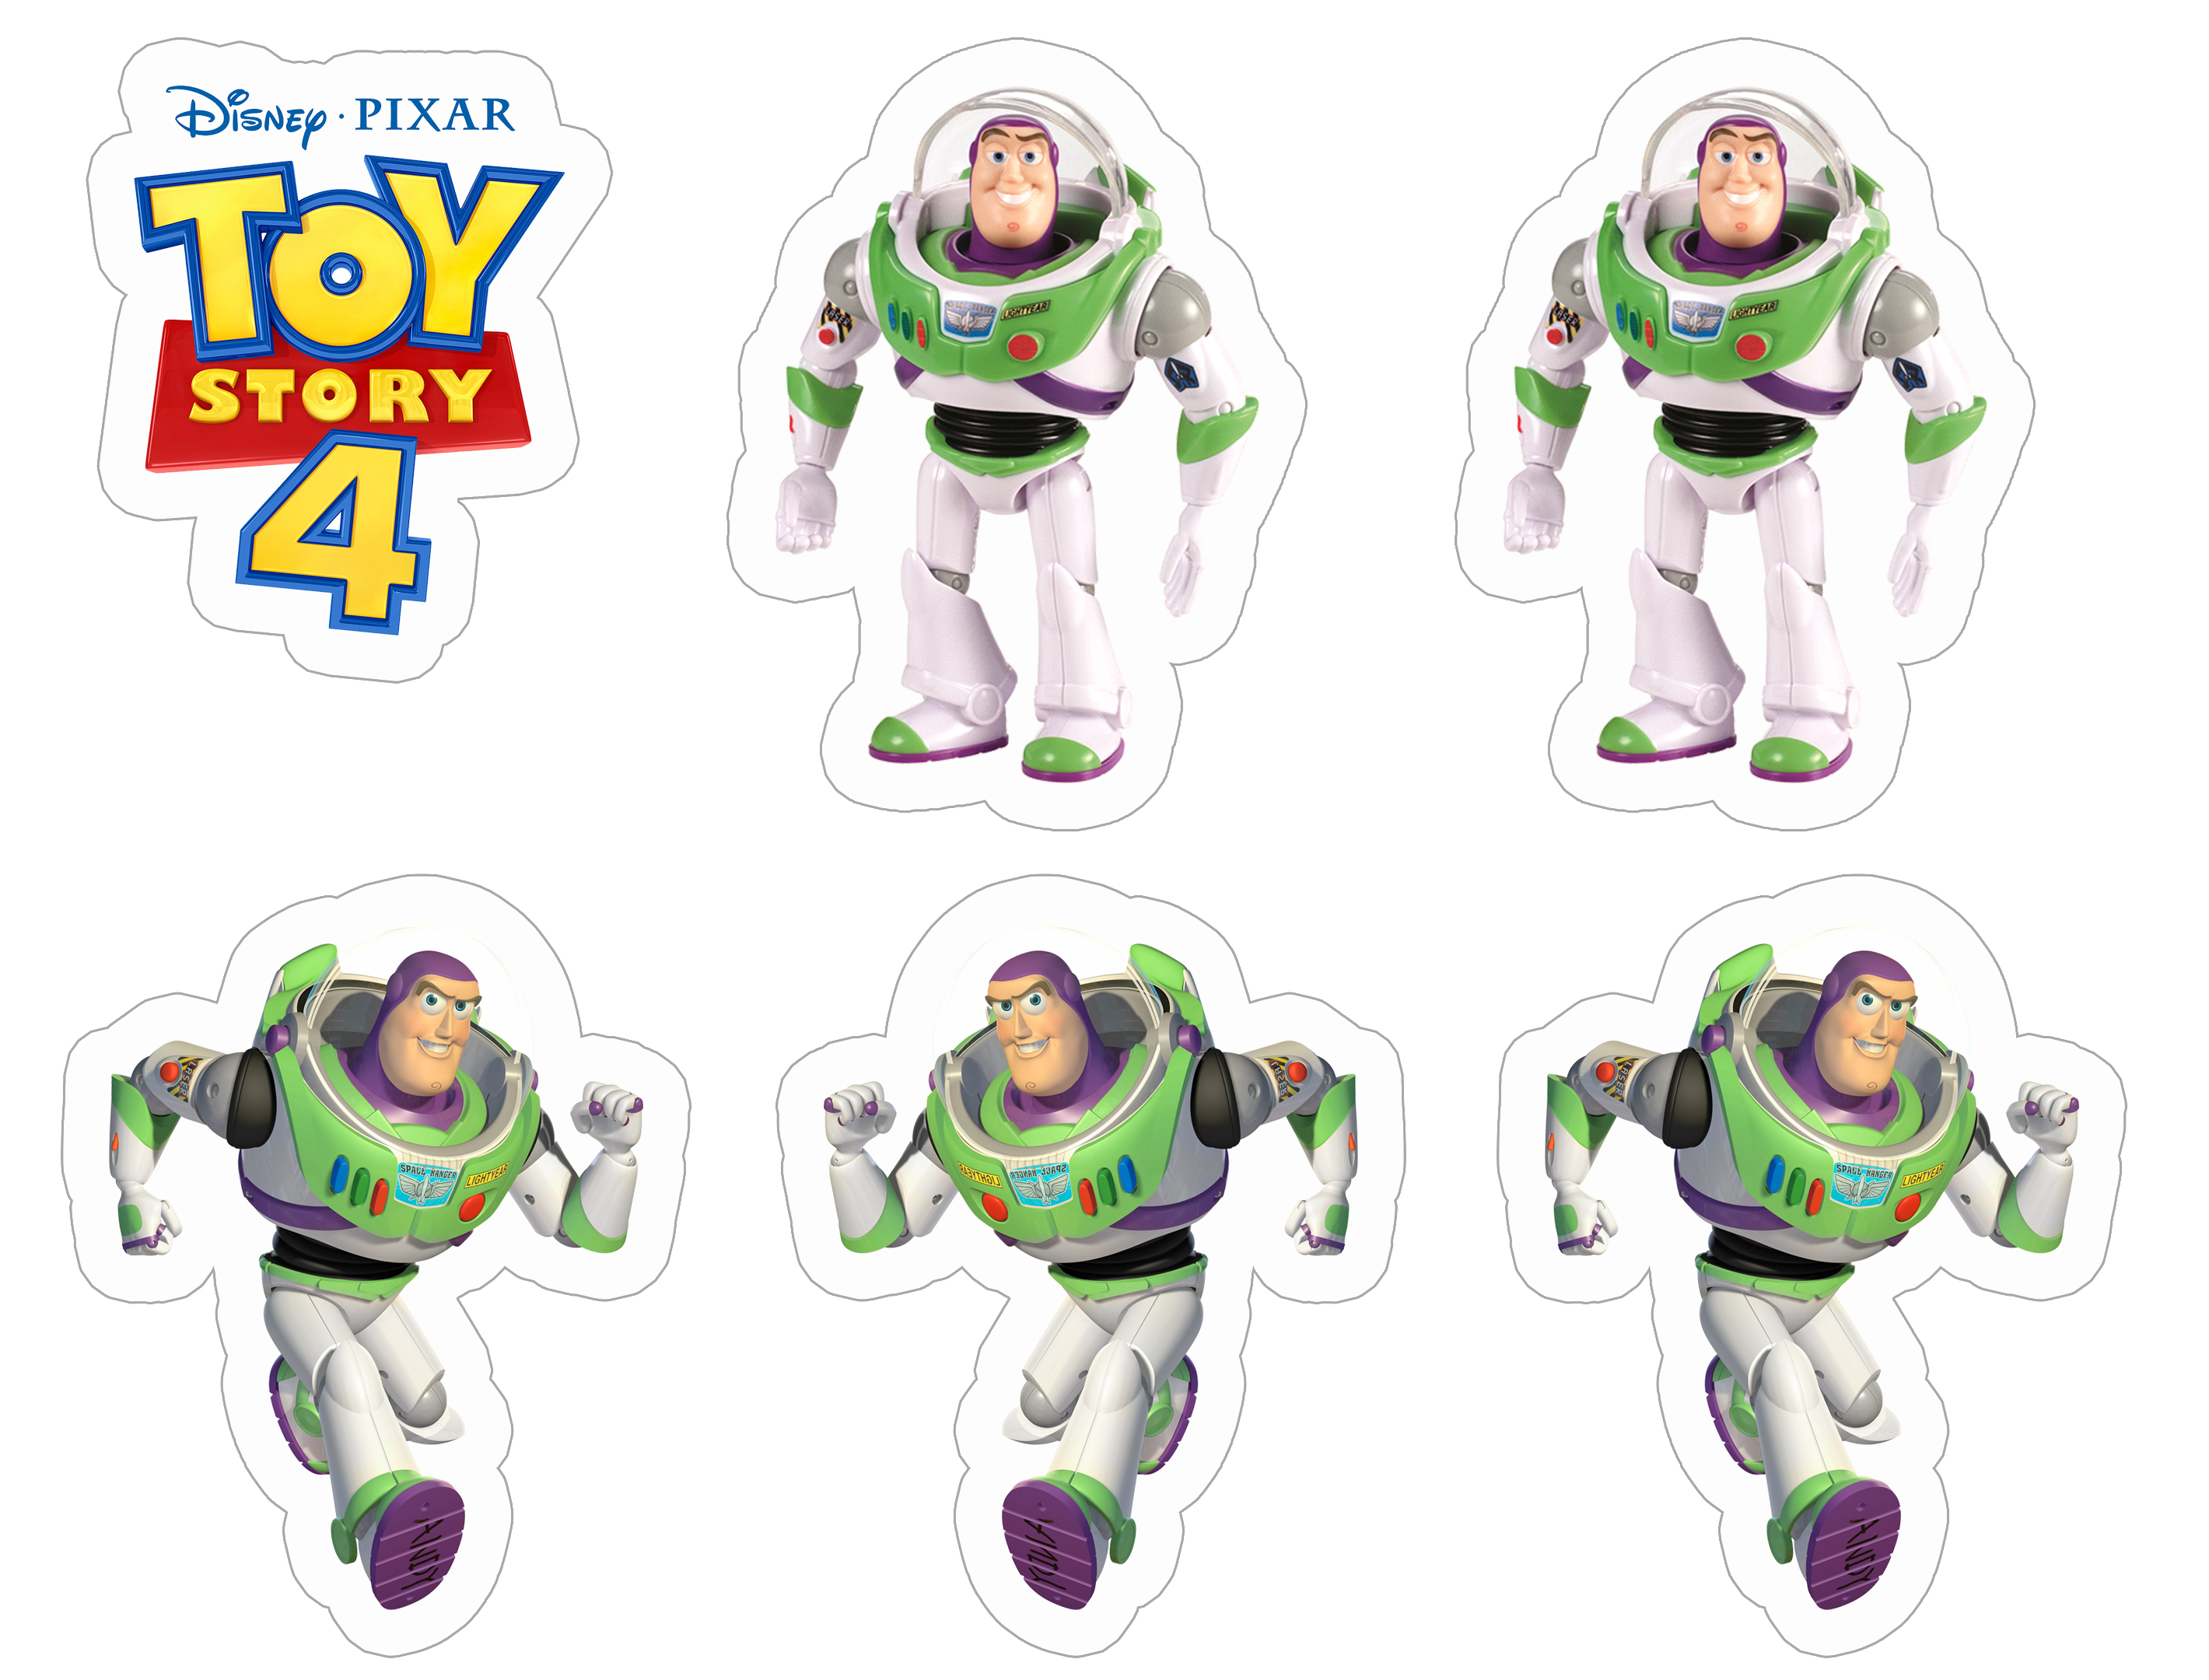 Buzz Lightyear Toy Story 4 free and printable sticker template